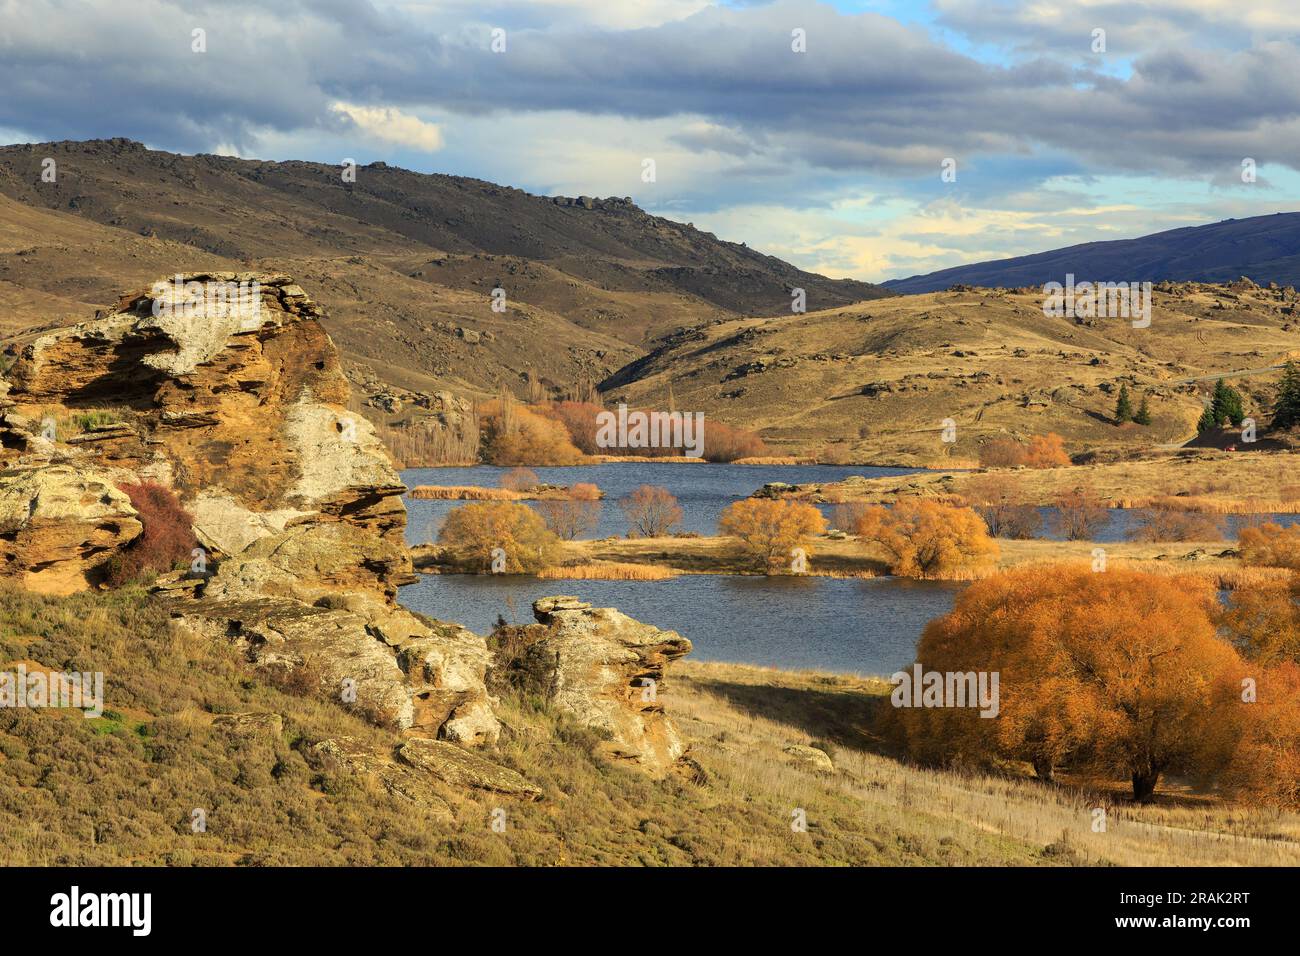 Autumn color at a lake on Butchers Creek in the Flat Top Conservation Area, Central Otago region, New Zealand Stock Photo